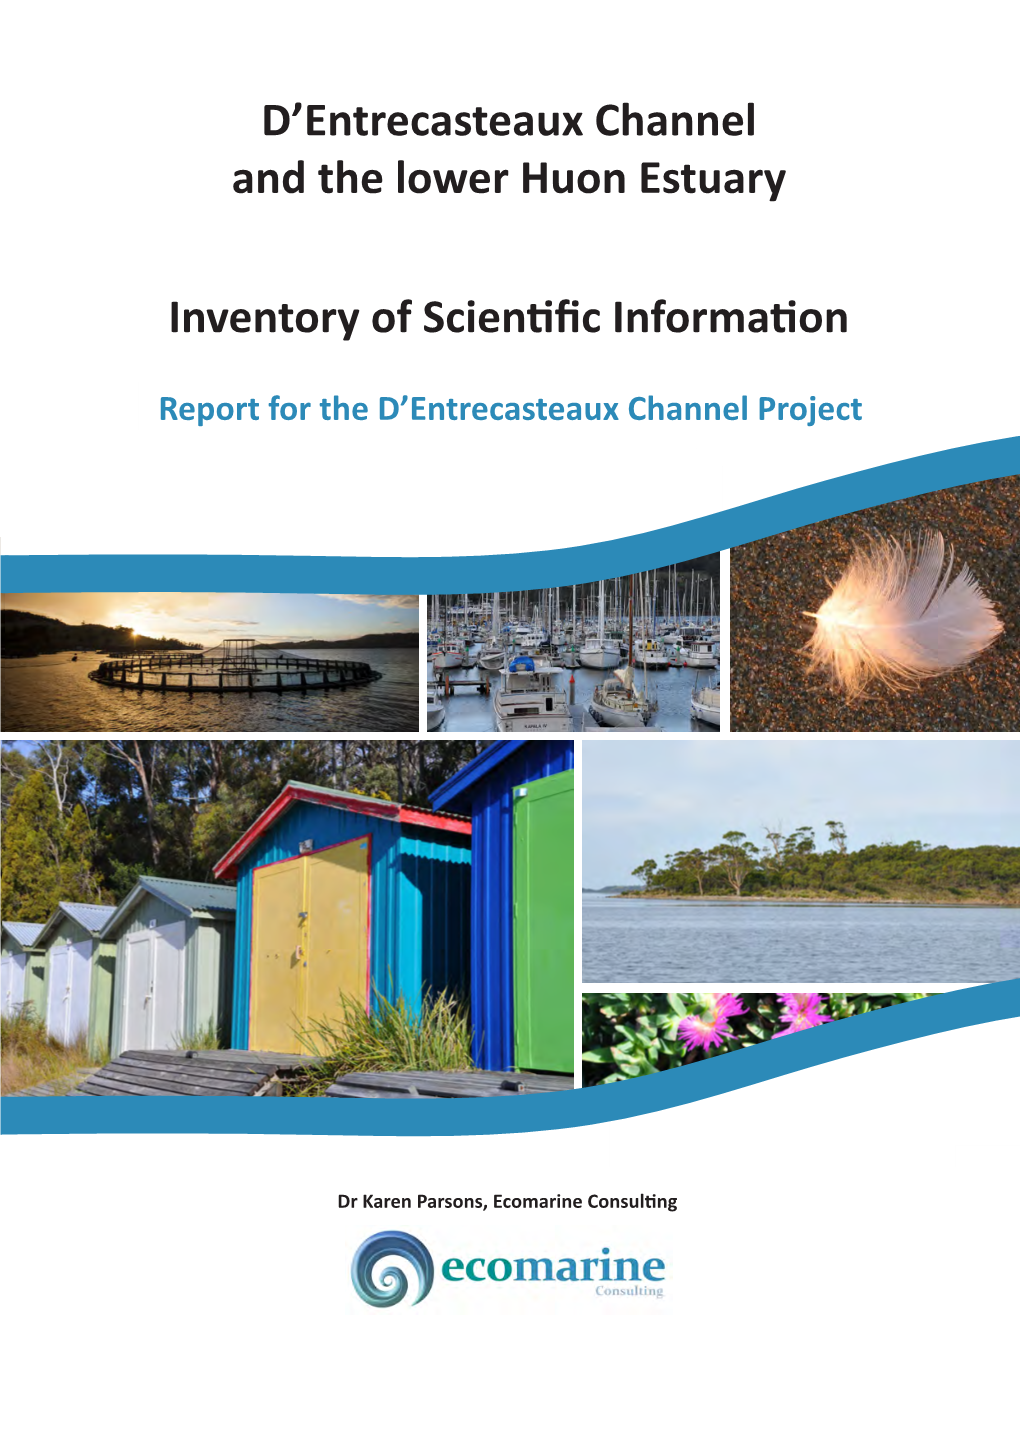 D'entrecasteaux Channel and the Lower Huon Estuary Inventory Of